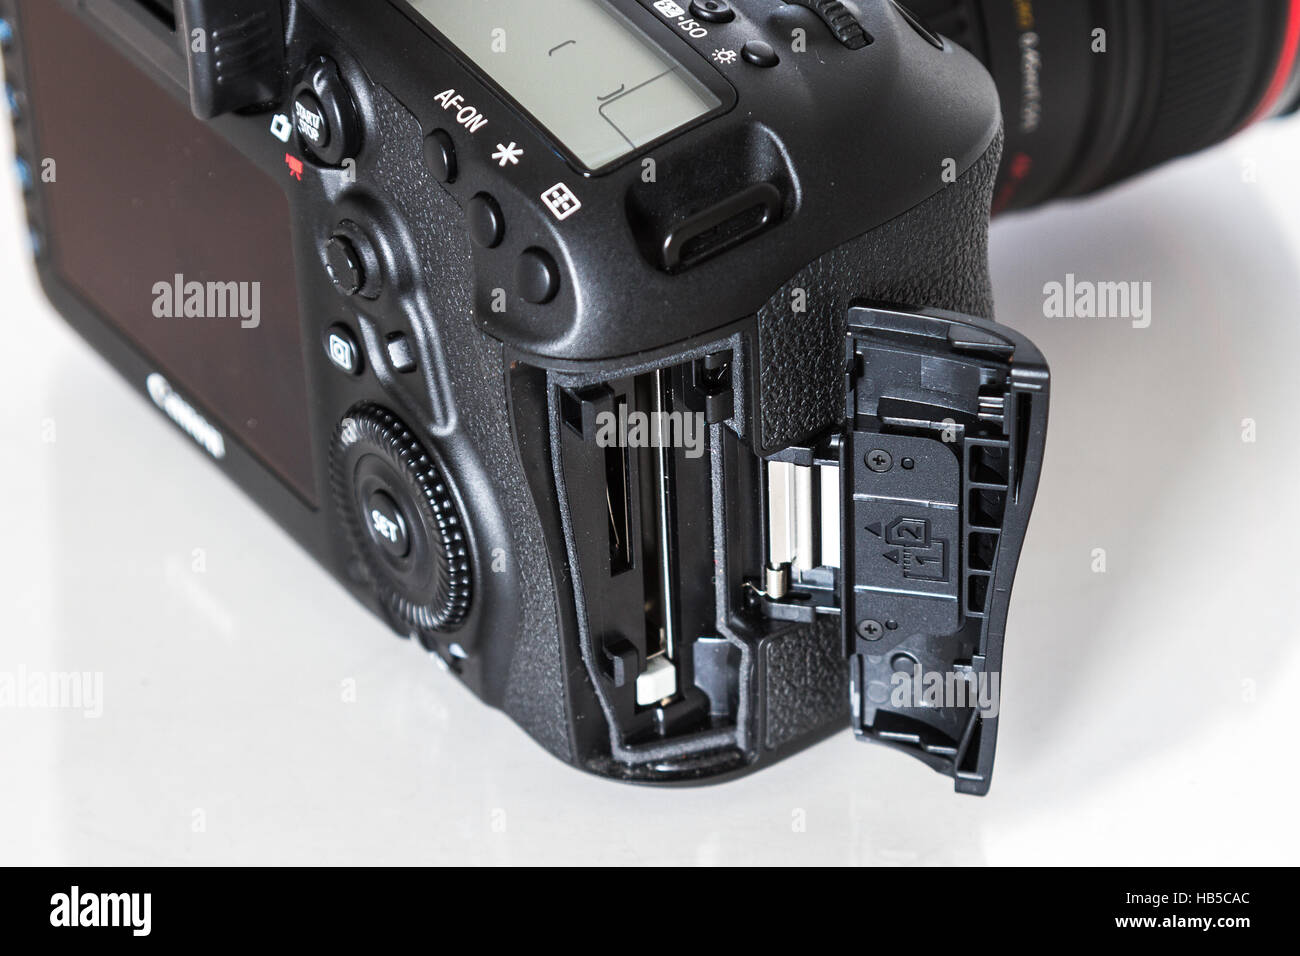 Canon 5D Mark IV camera showing cards sloth, with Canon EF 24-70mm f/2.8L II USM lens on a white background Stock Photo